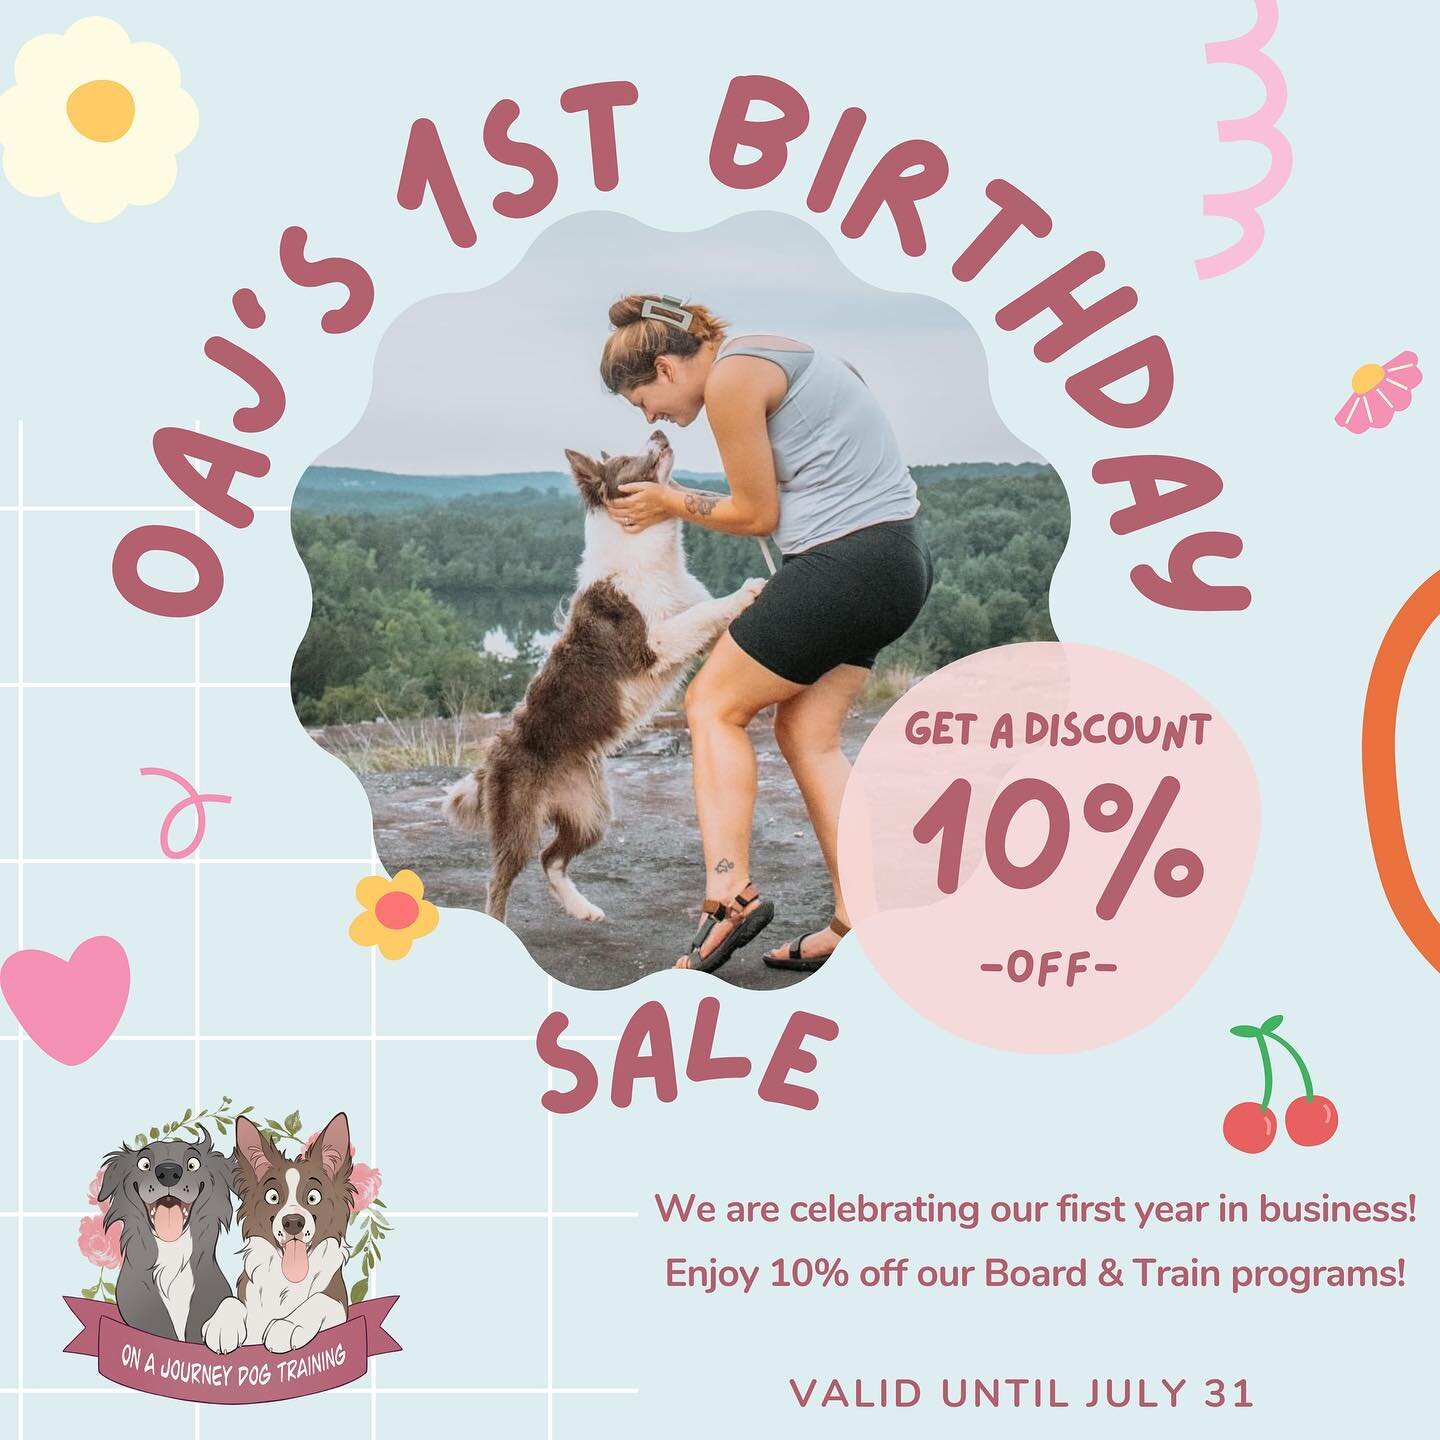 🥳 IT&rsquo;S OUR BIRTHDAY! 🥳

On A Journey is celebrating our 1st year of helping owners build better relationships with their dogs! We&rsquo;d love to celebrate with you and offer 10% off of all of our board and train programs, including our Puppy